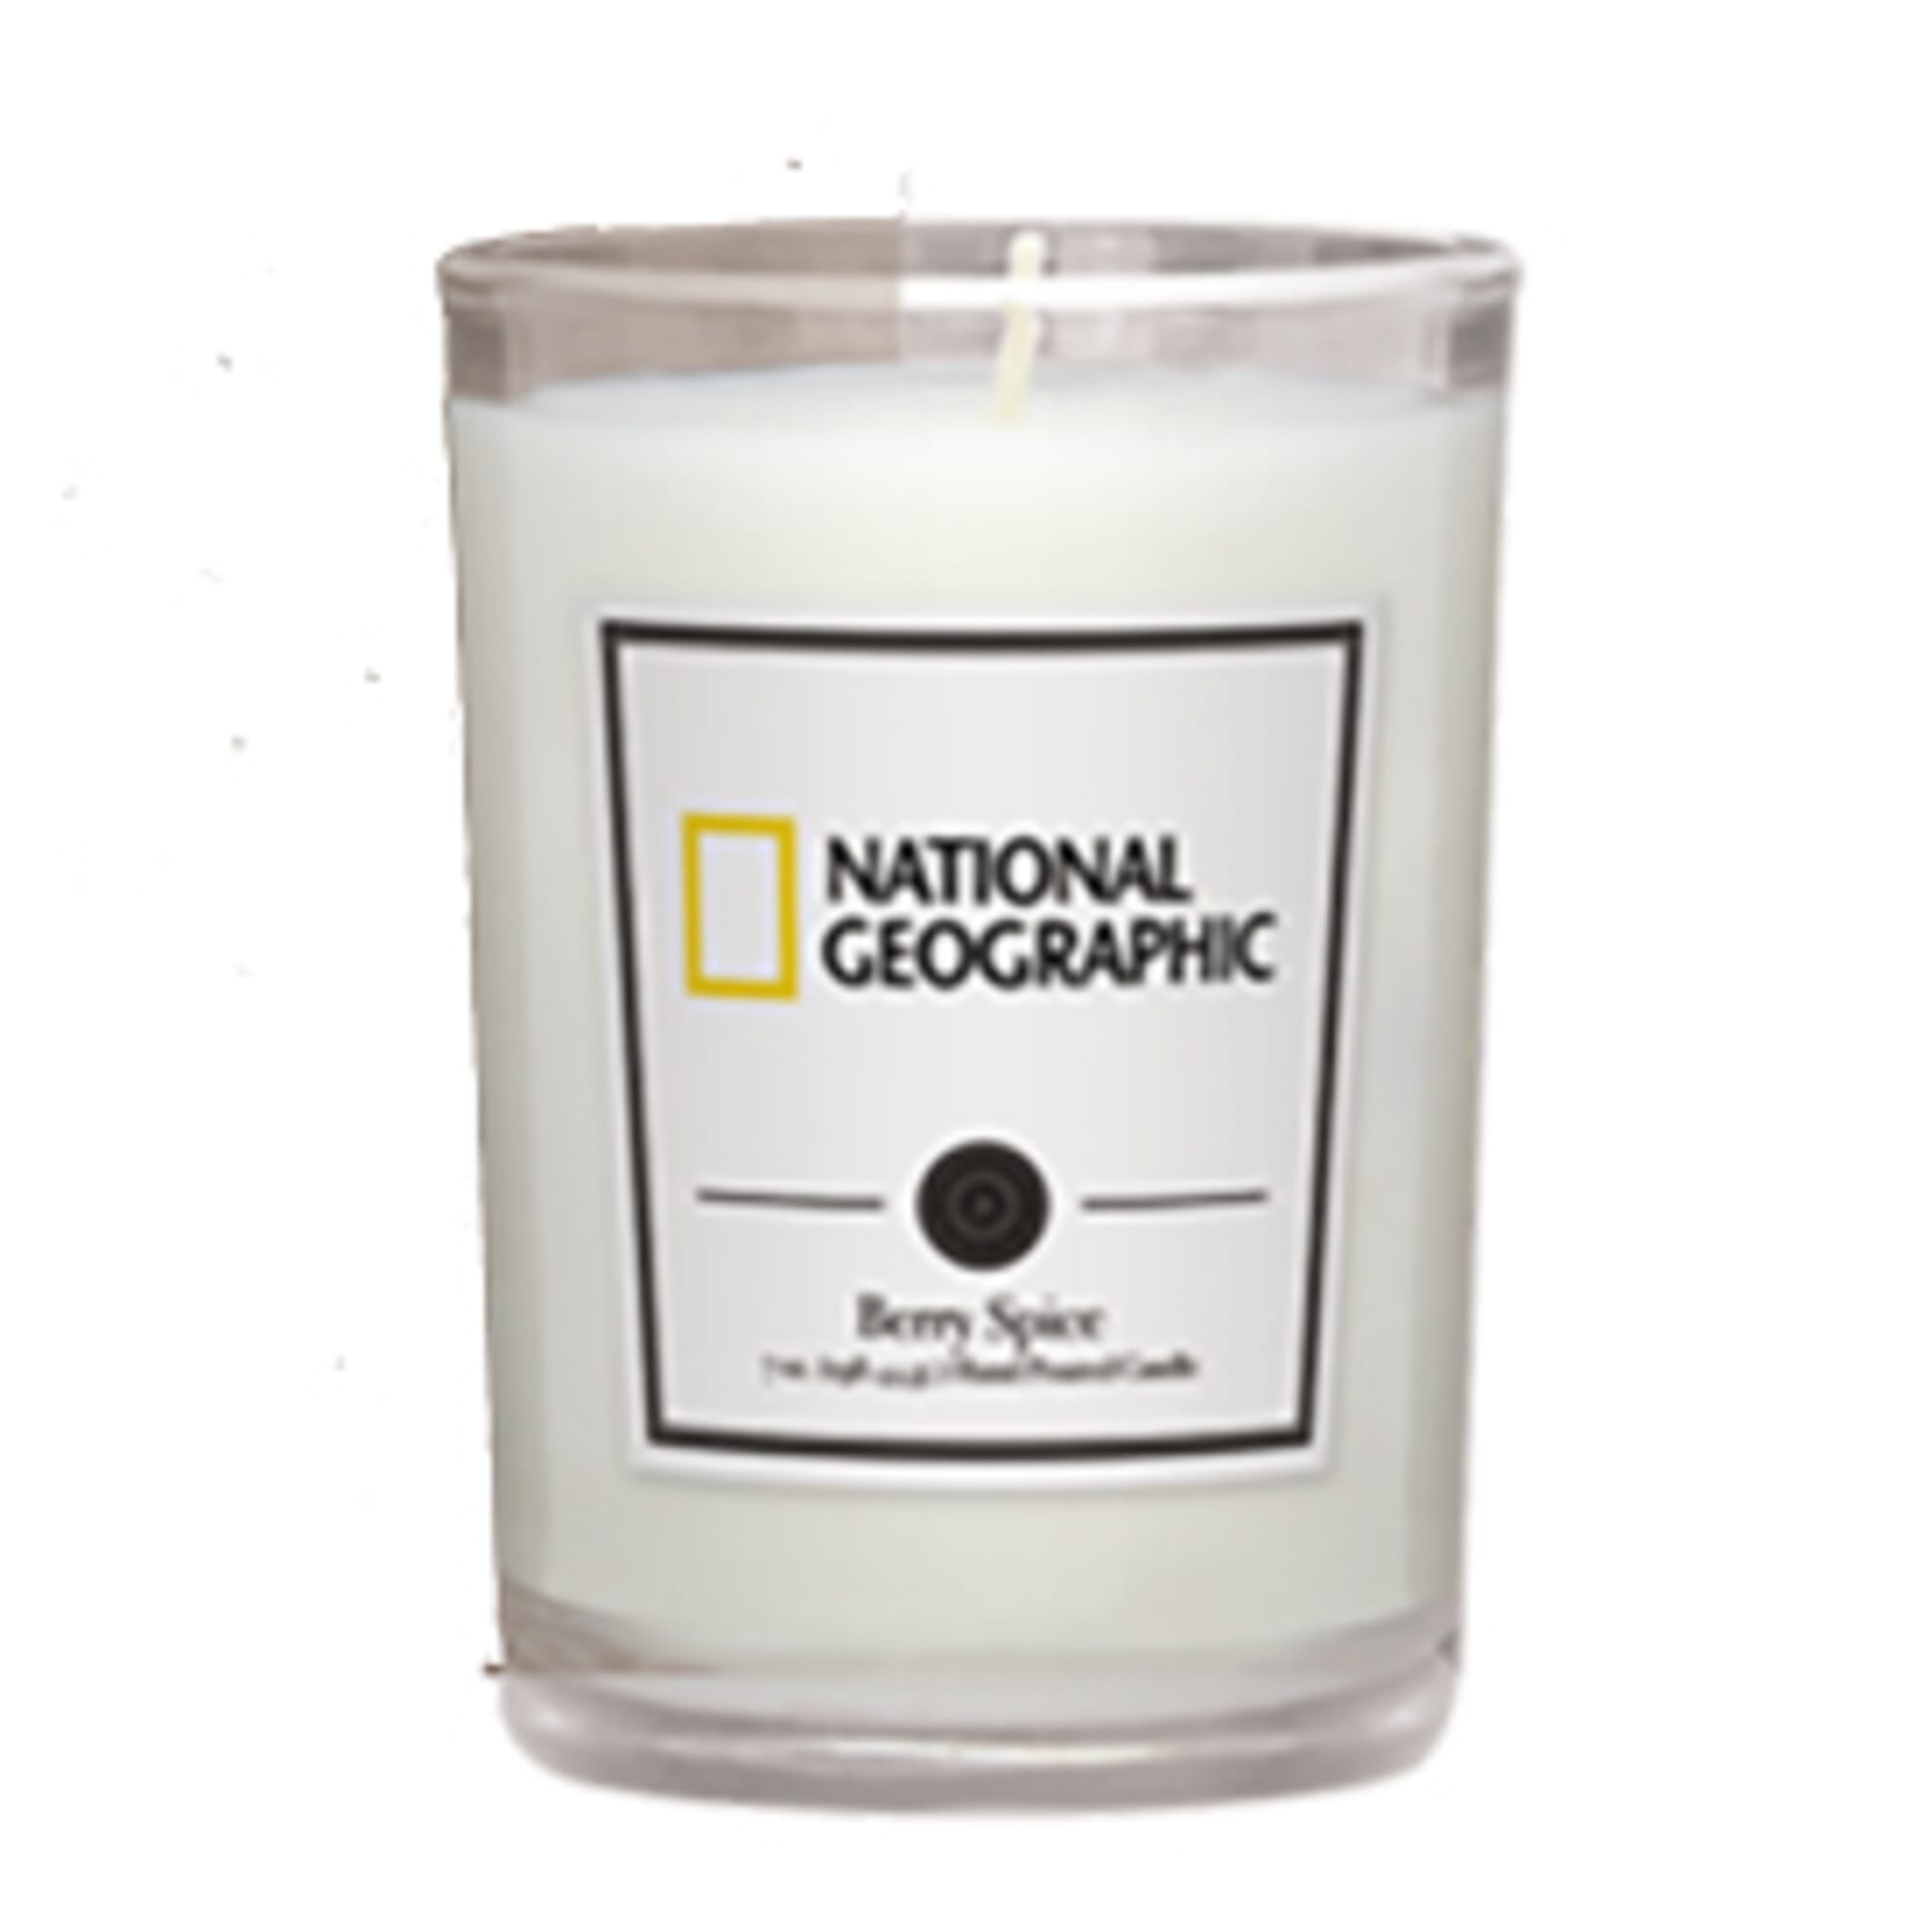 Tumbler Jar Scented Candle